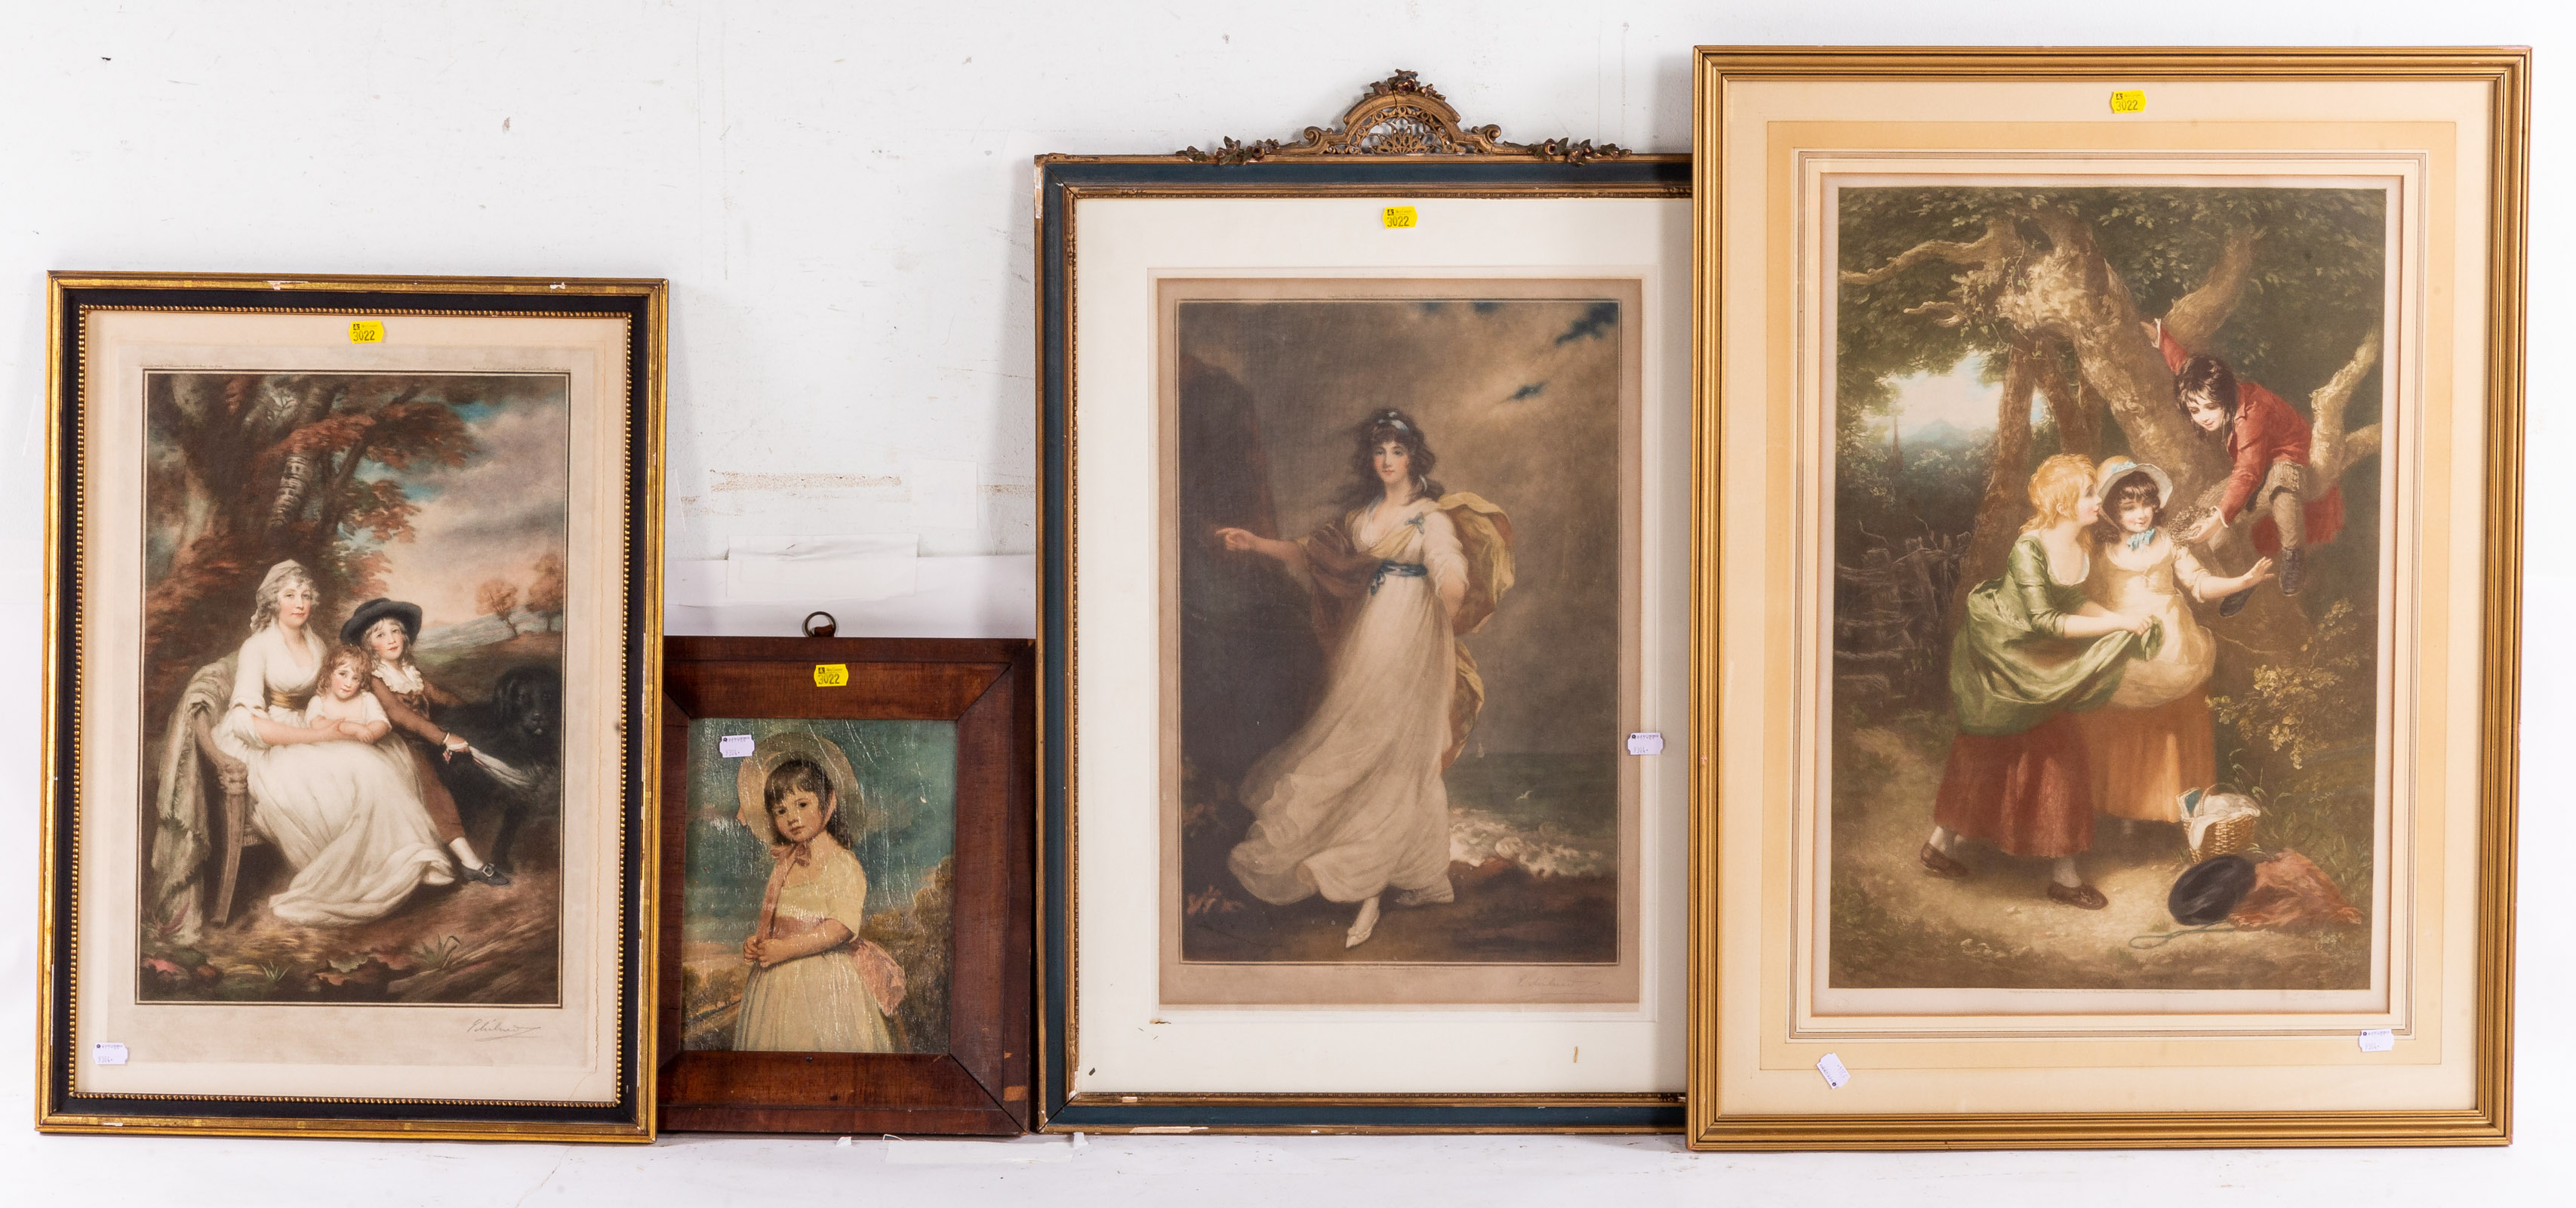 THREE FRAMED MEZZOTINTS WITH A